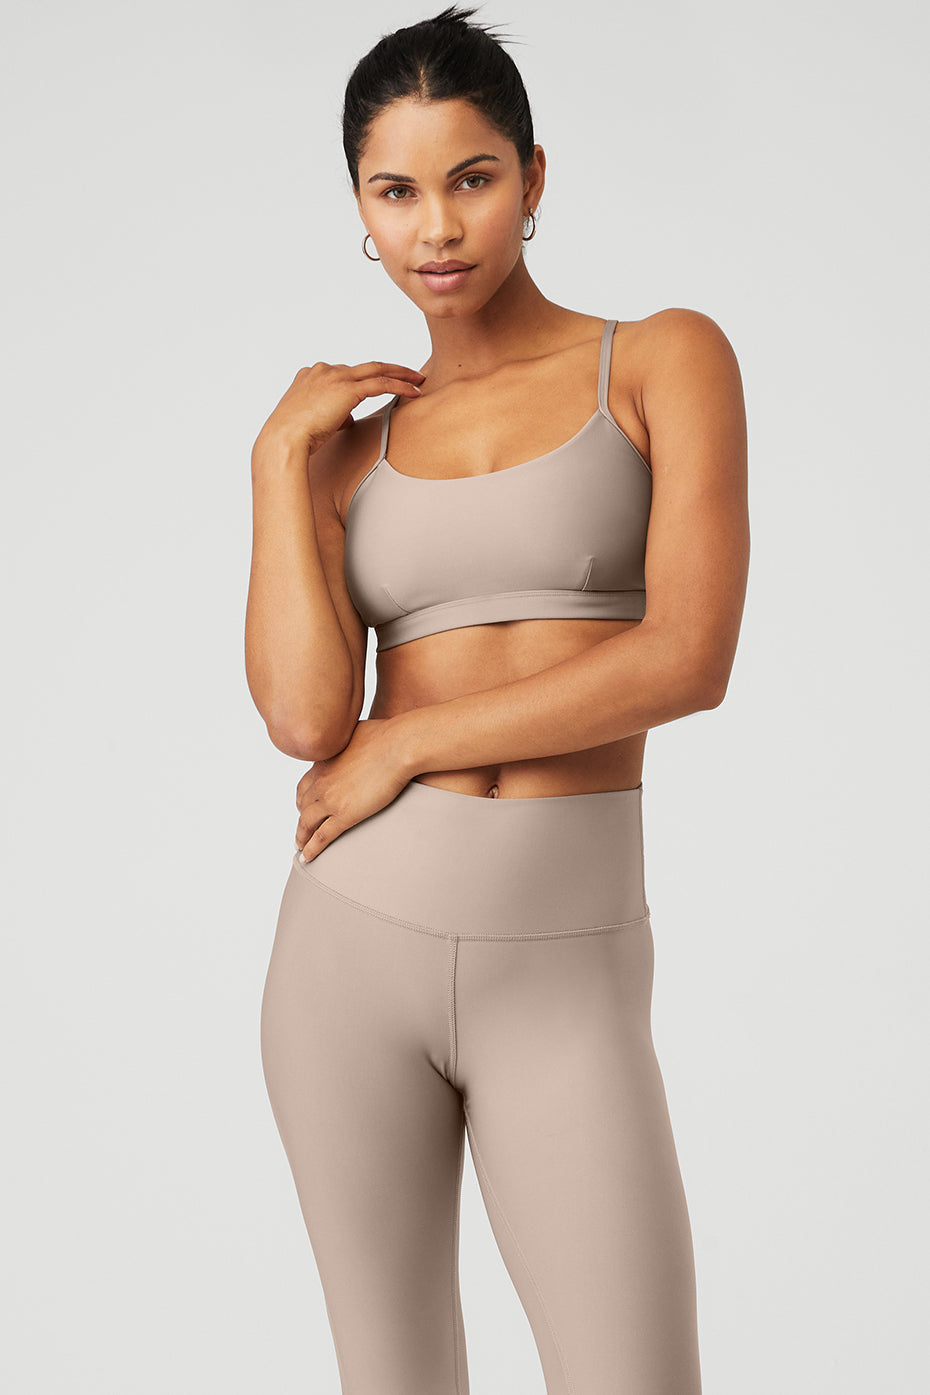 Airlift Intrigue Bra - Taupe